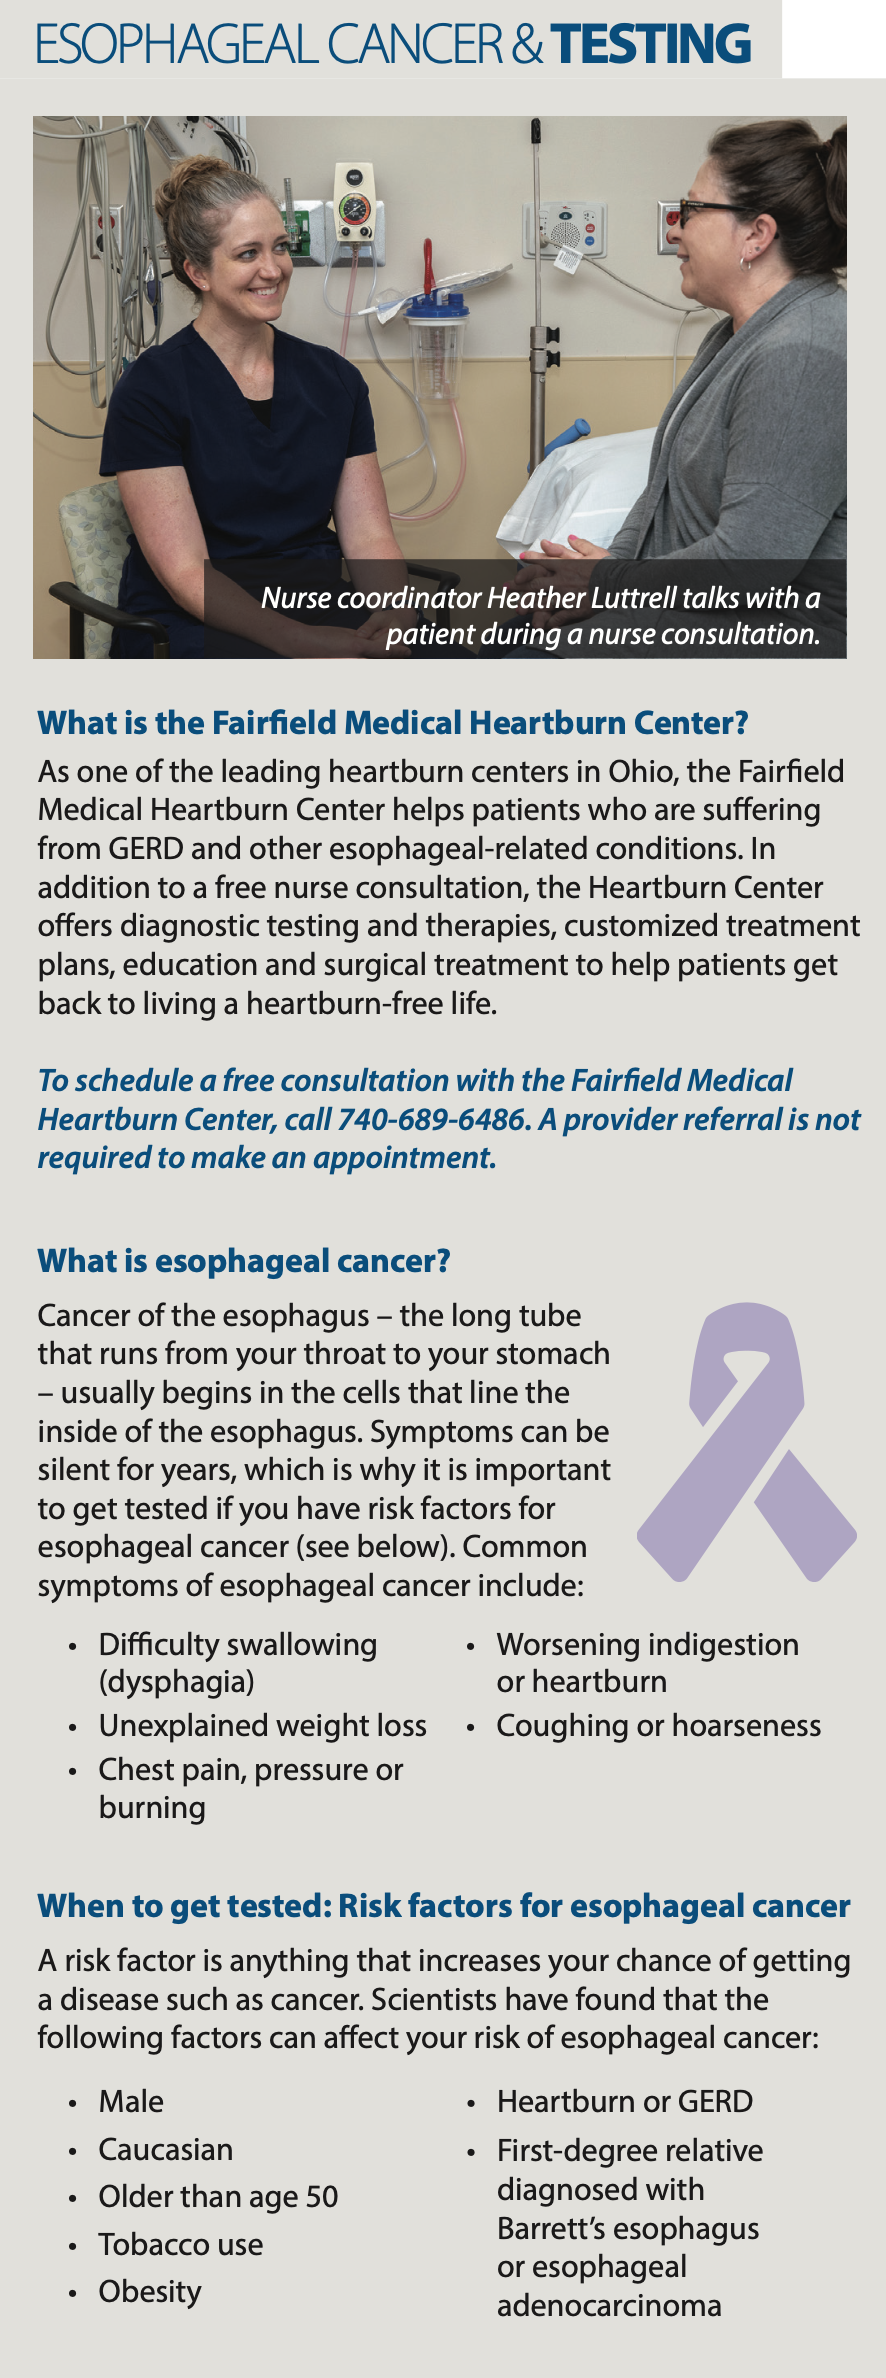 What is Esophageal Cancer Testing